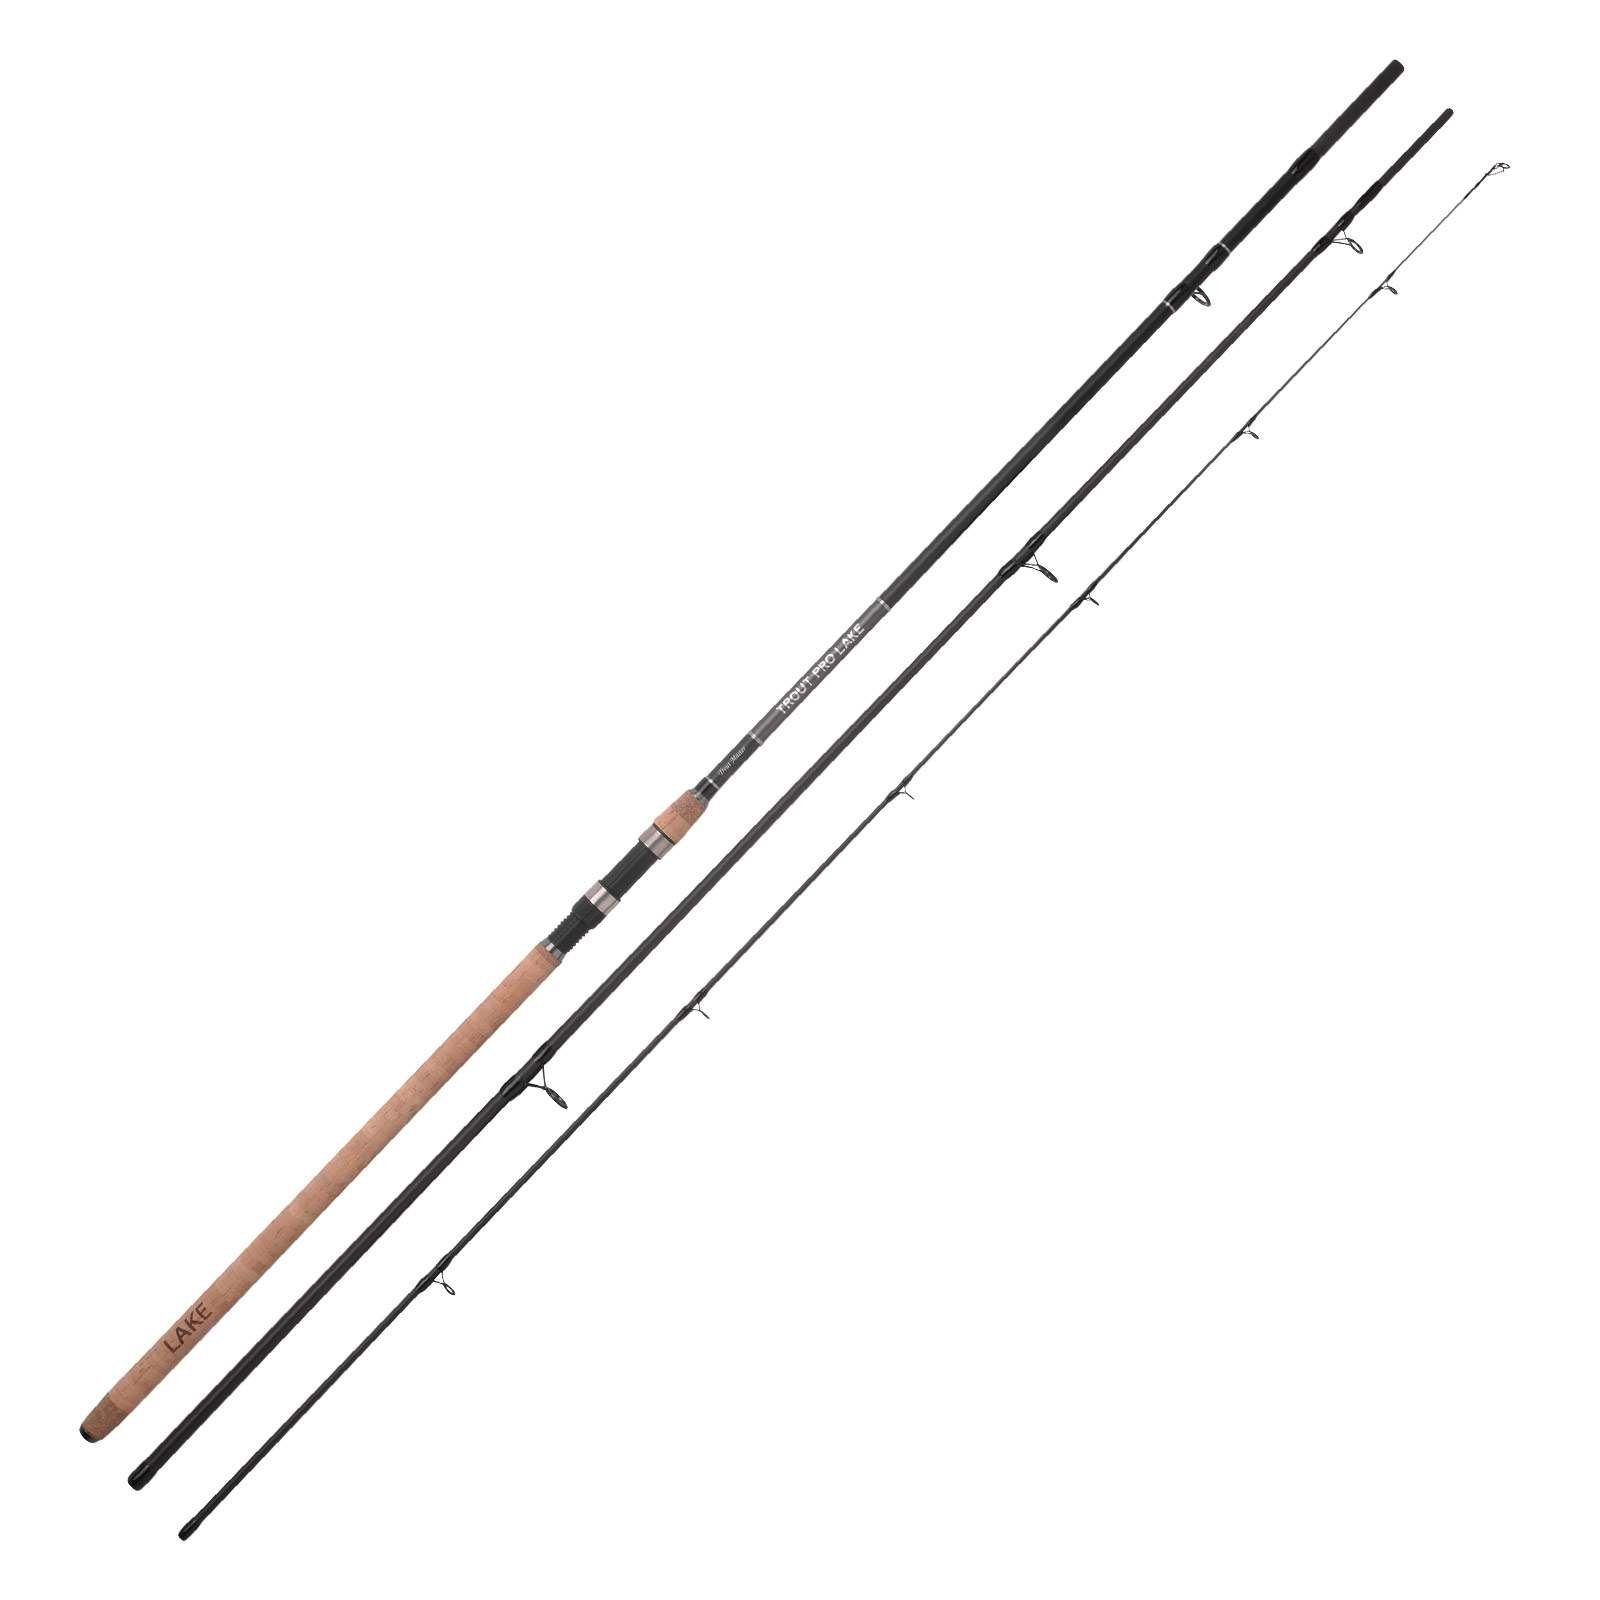 Forellenrute, 3.00 Spro Lake Master (3-tlg), SPRO Trout Trout Forellenrute Pro 40g